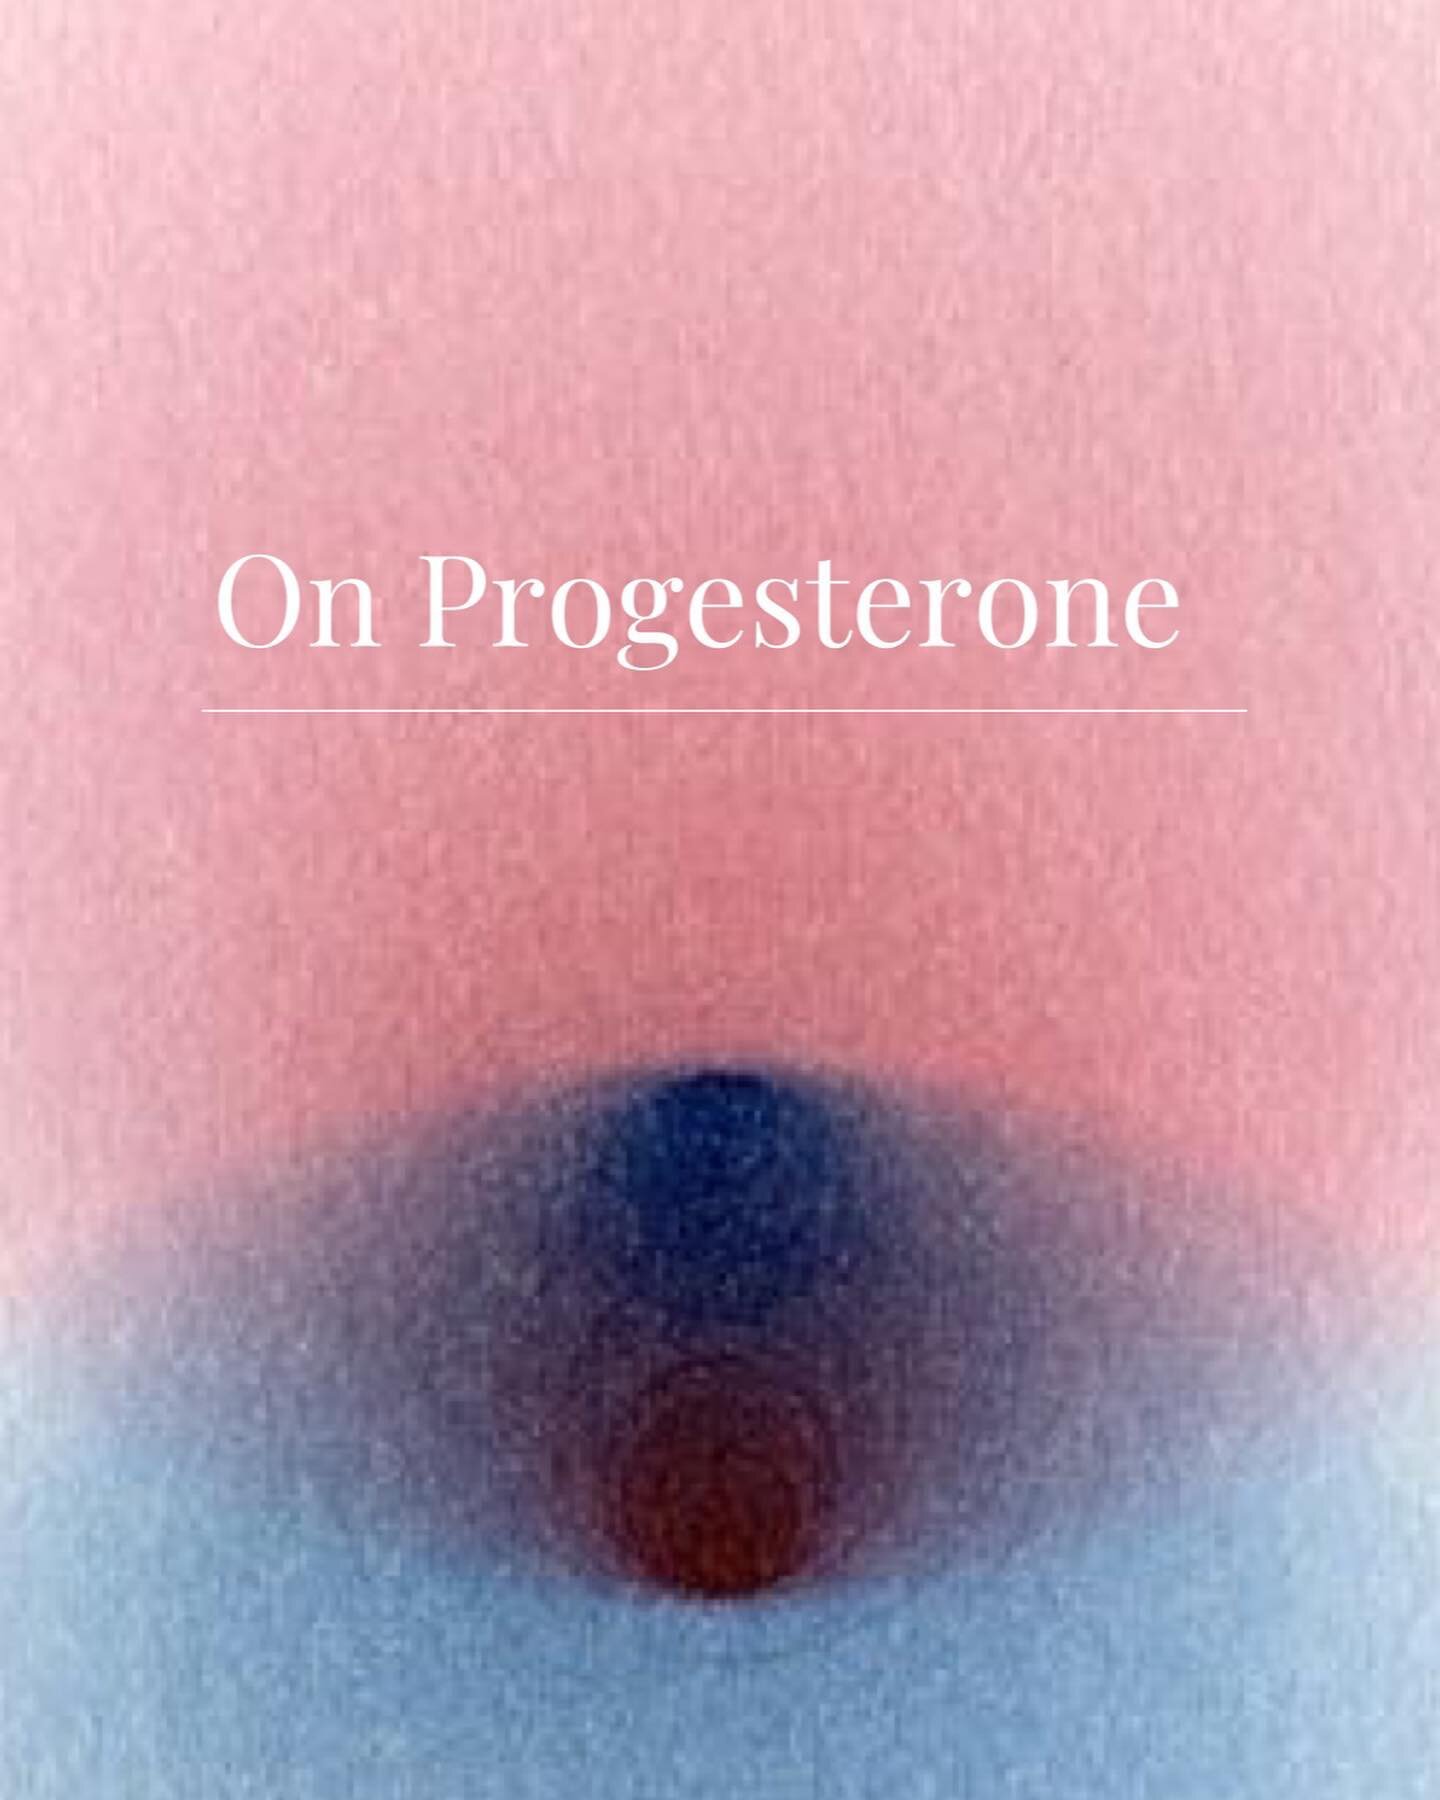 &quot;It's a lot easier to make estrogen than progesterone. That's because you make estrogen on the journey to ovulation and, as we see with anovulatory cycles, you can also make a lot of estrogen but never actually reach ovulation.  In contrast, you